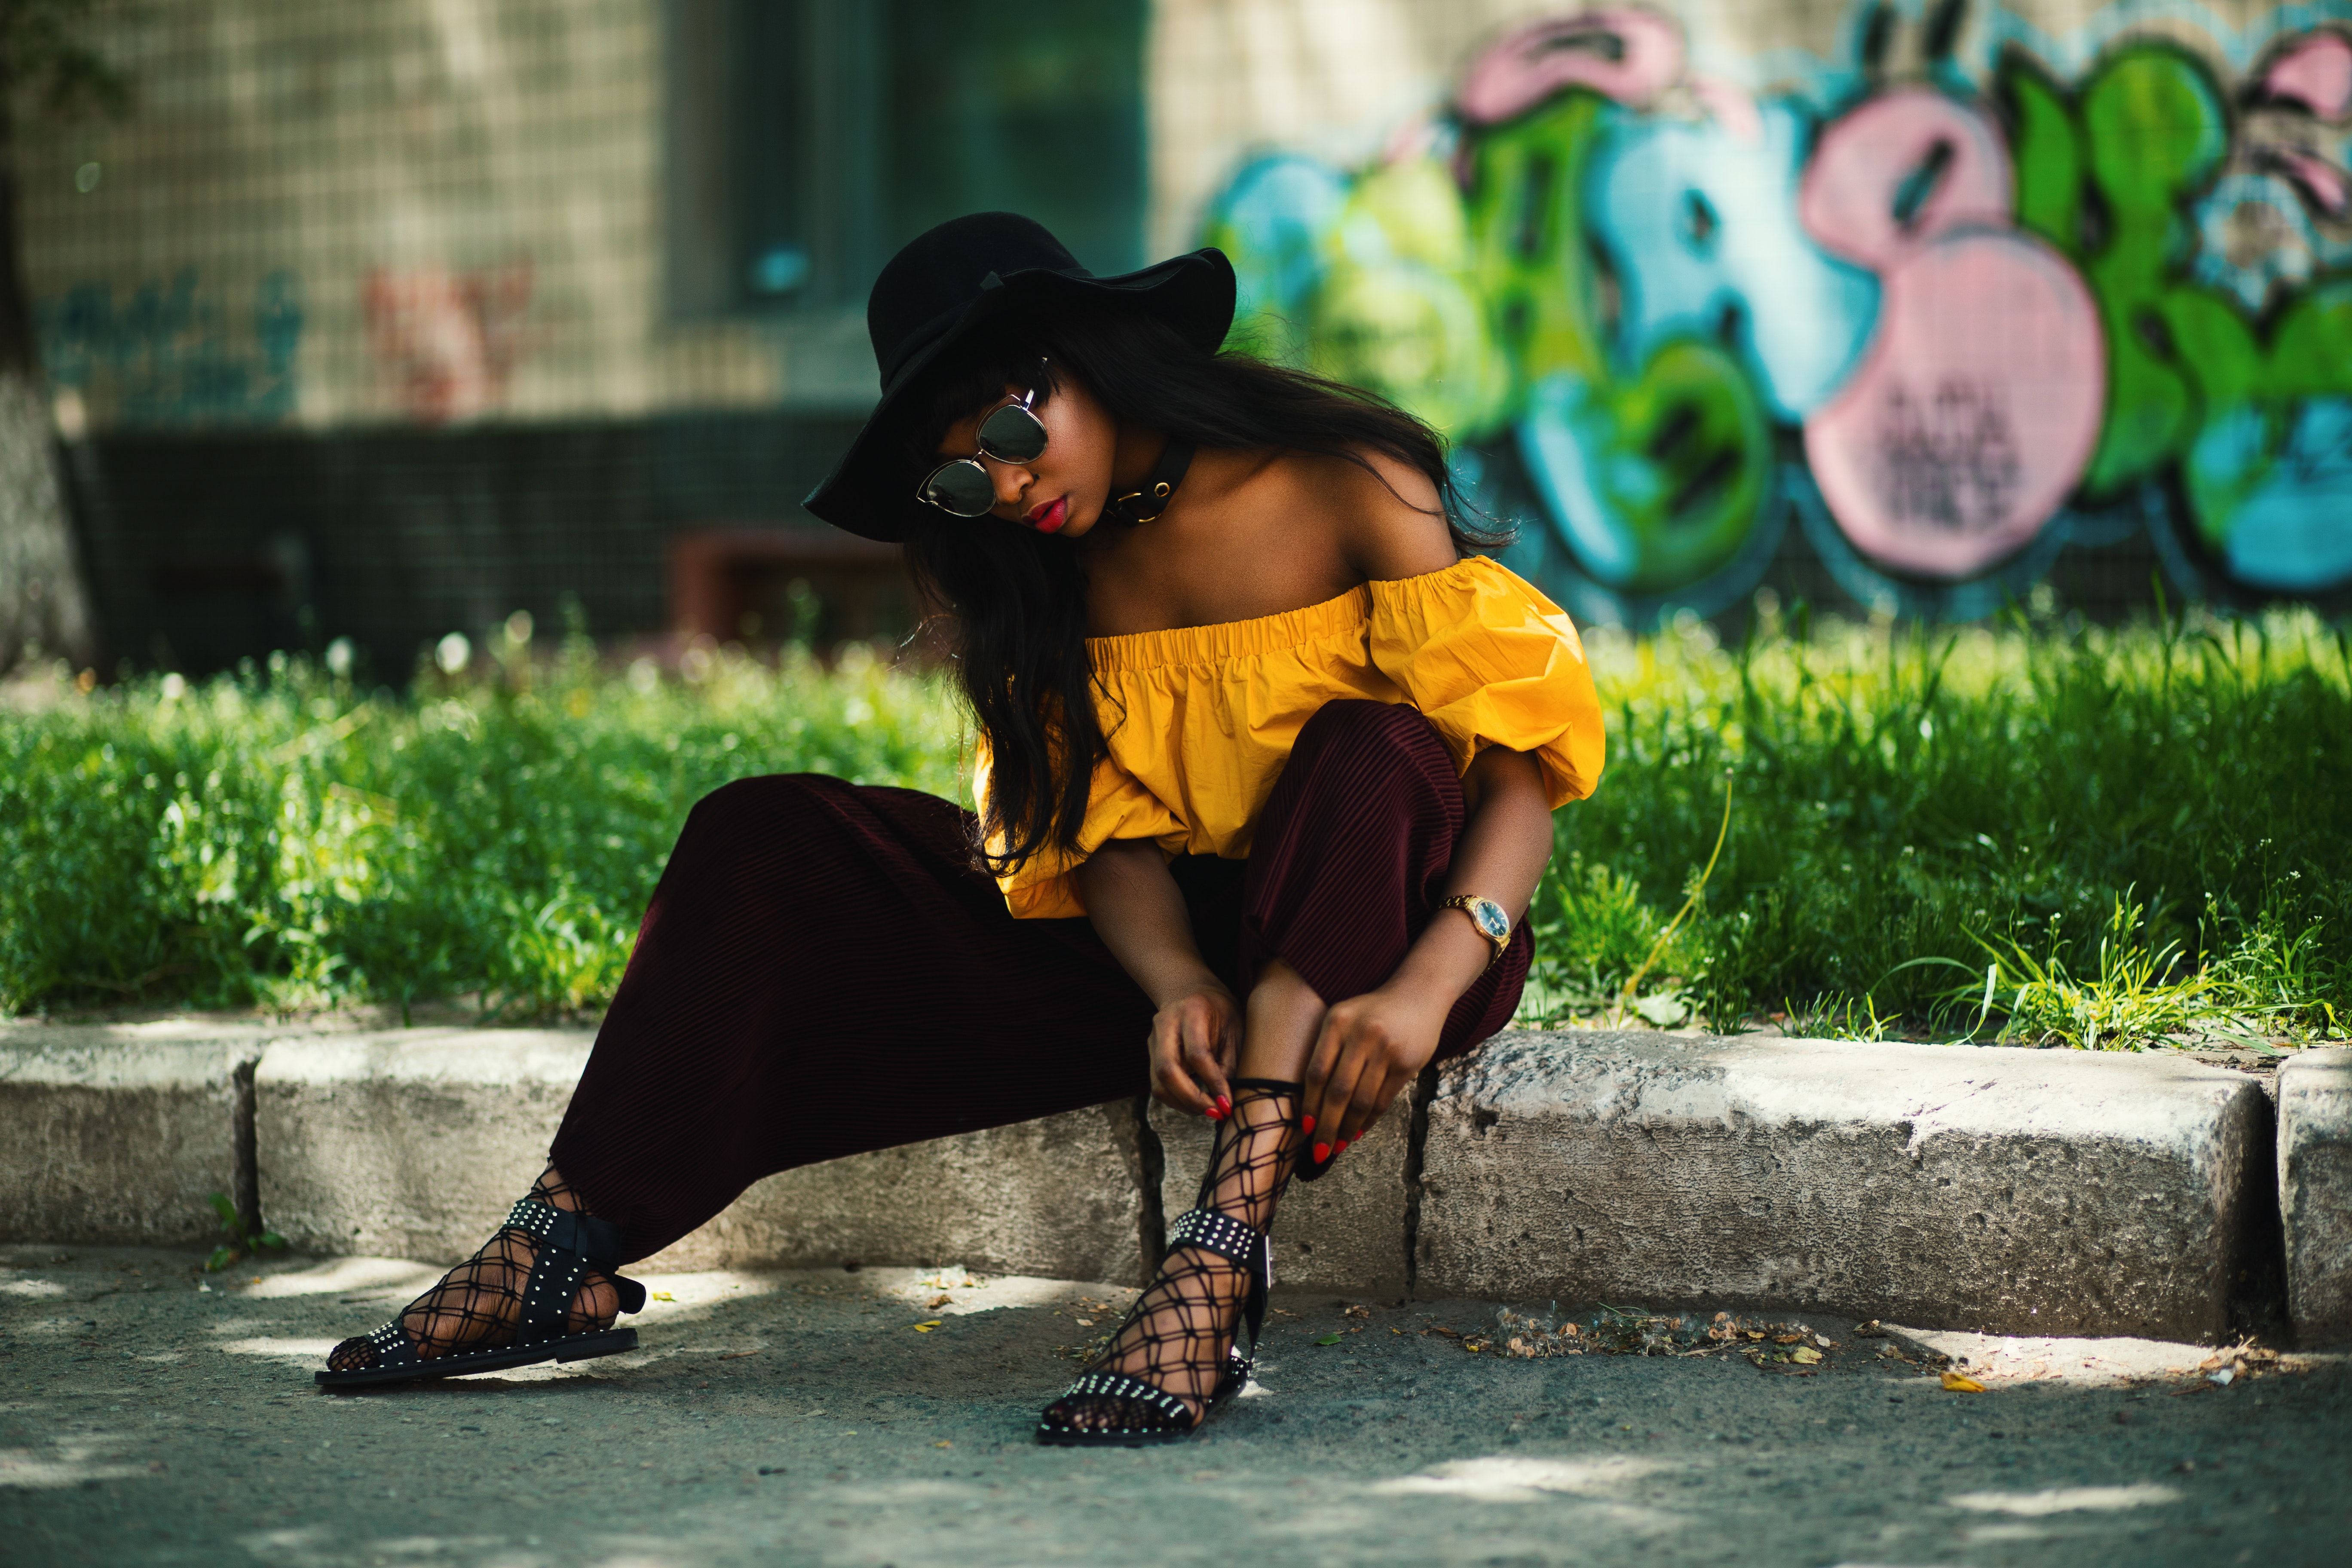 Woman wearing yellow off-shoulder top and black pants sitting on sidewalk fixing lace sandals photo